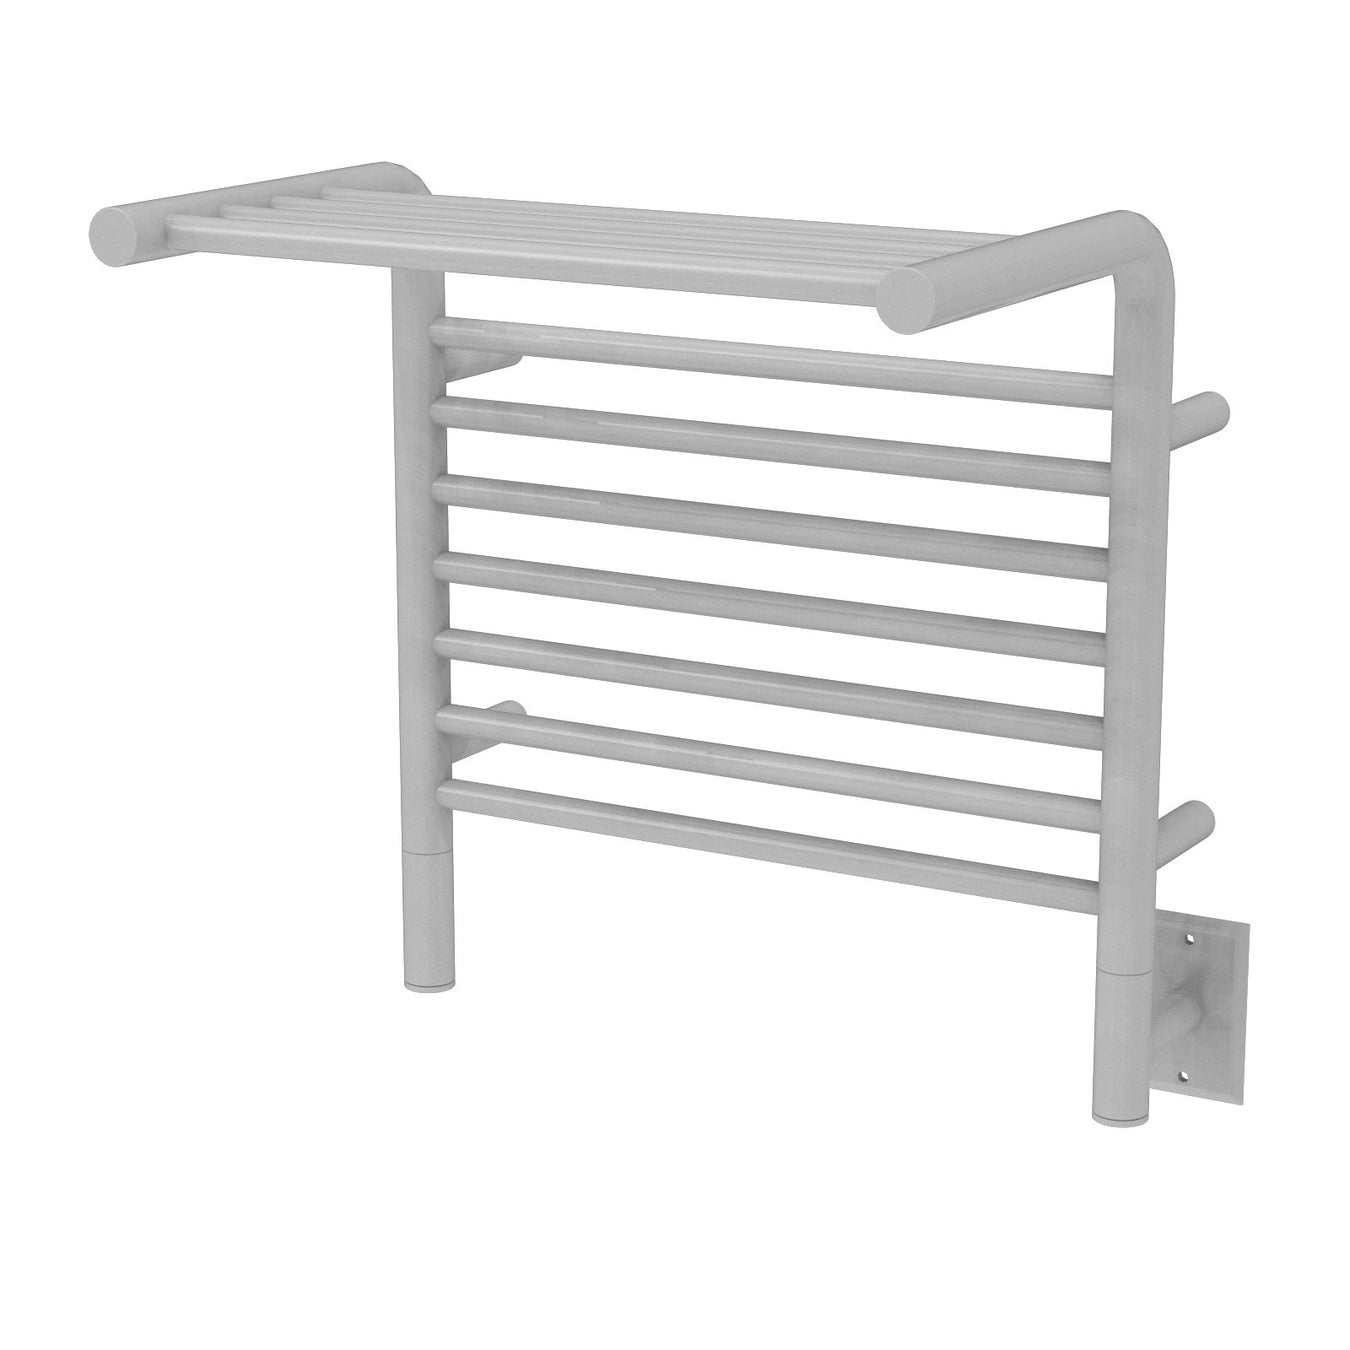 Amba Products Jeeves Collection Model M Shelf Towel Warmers